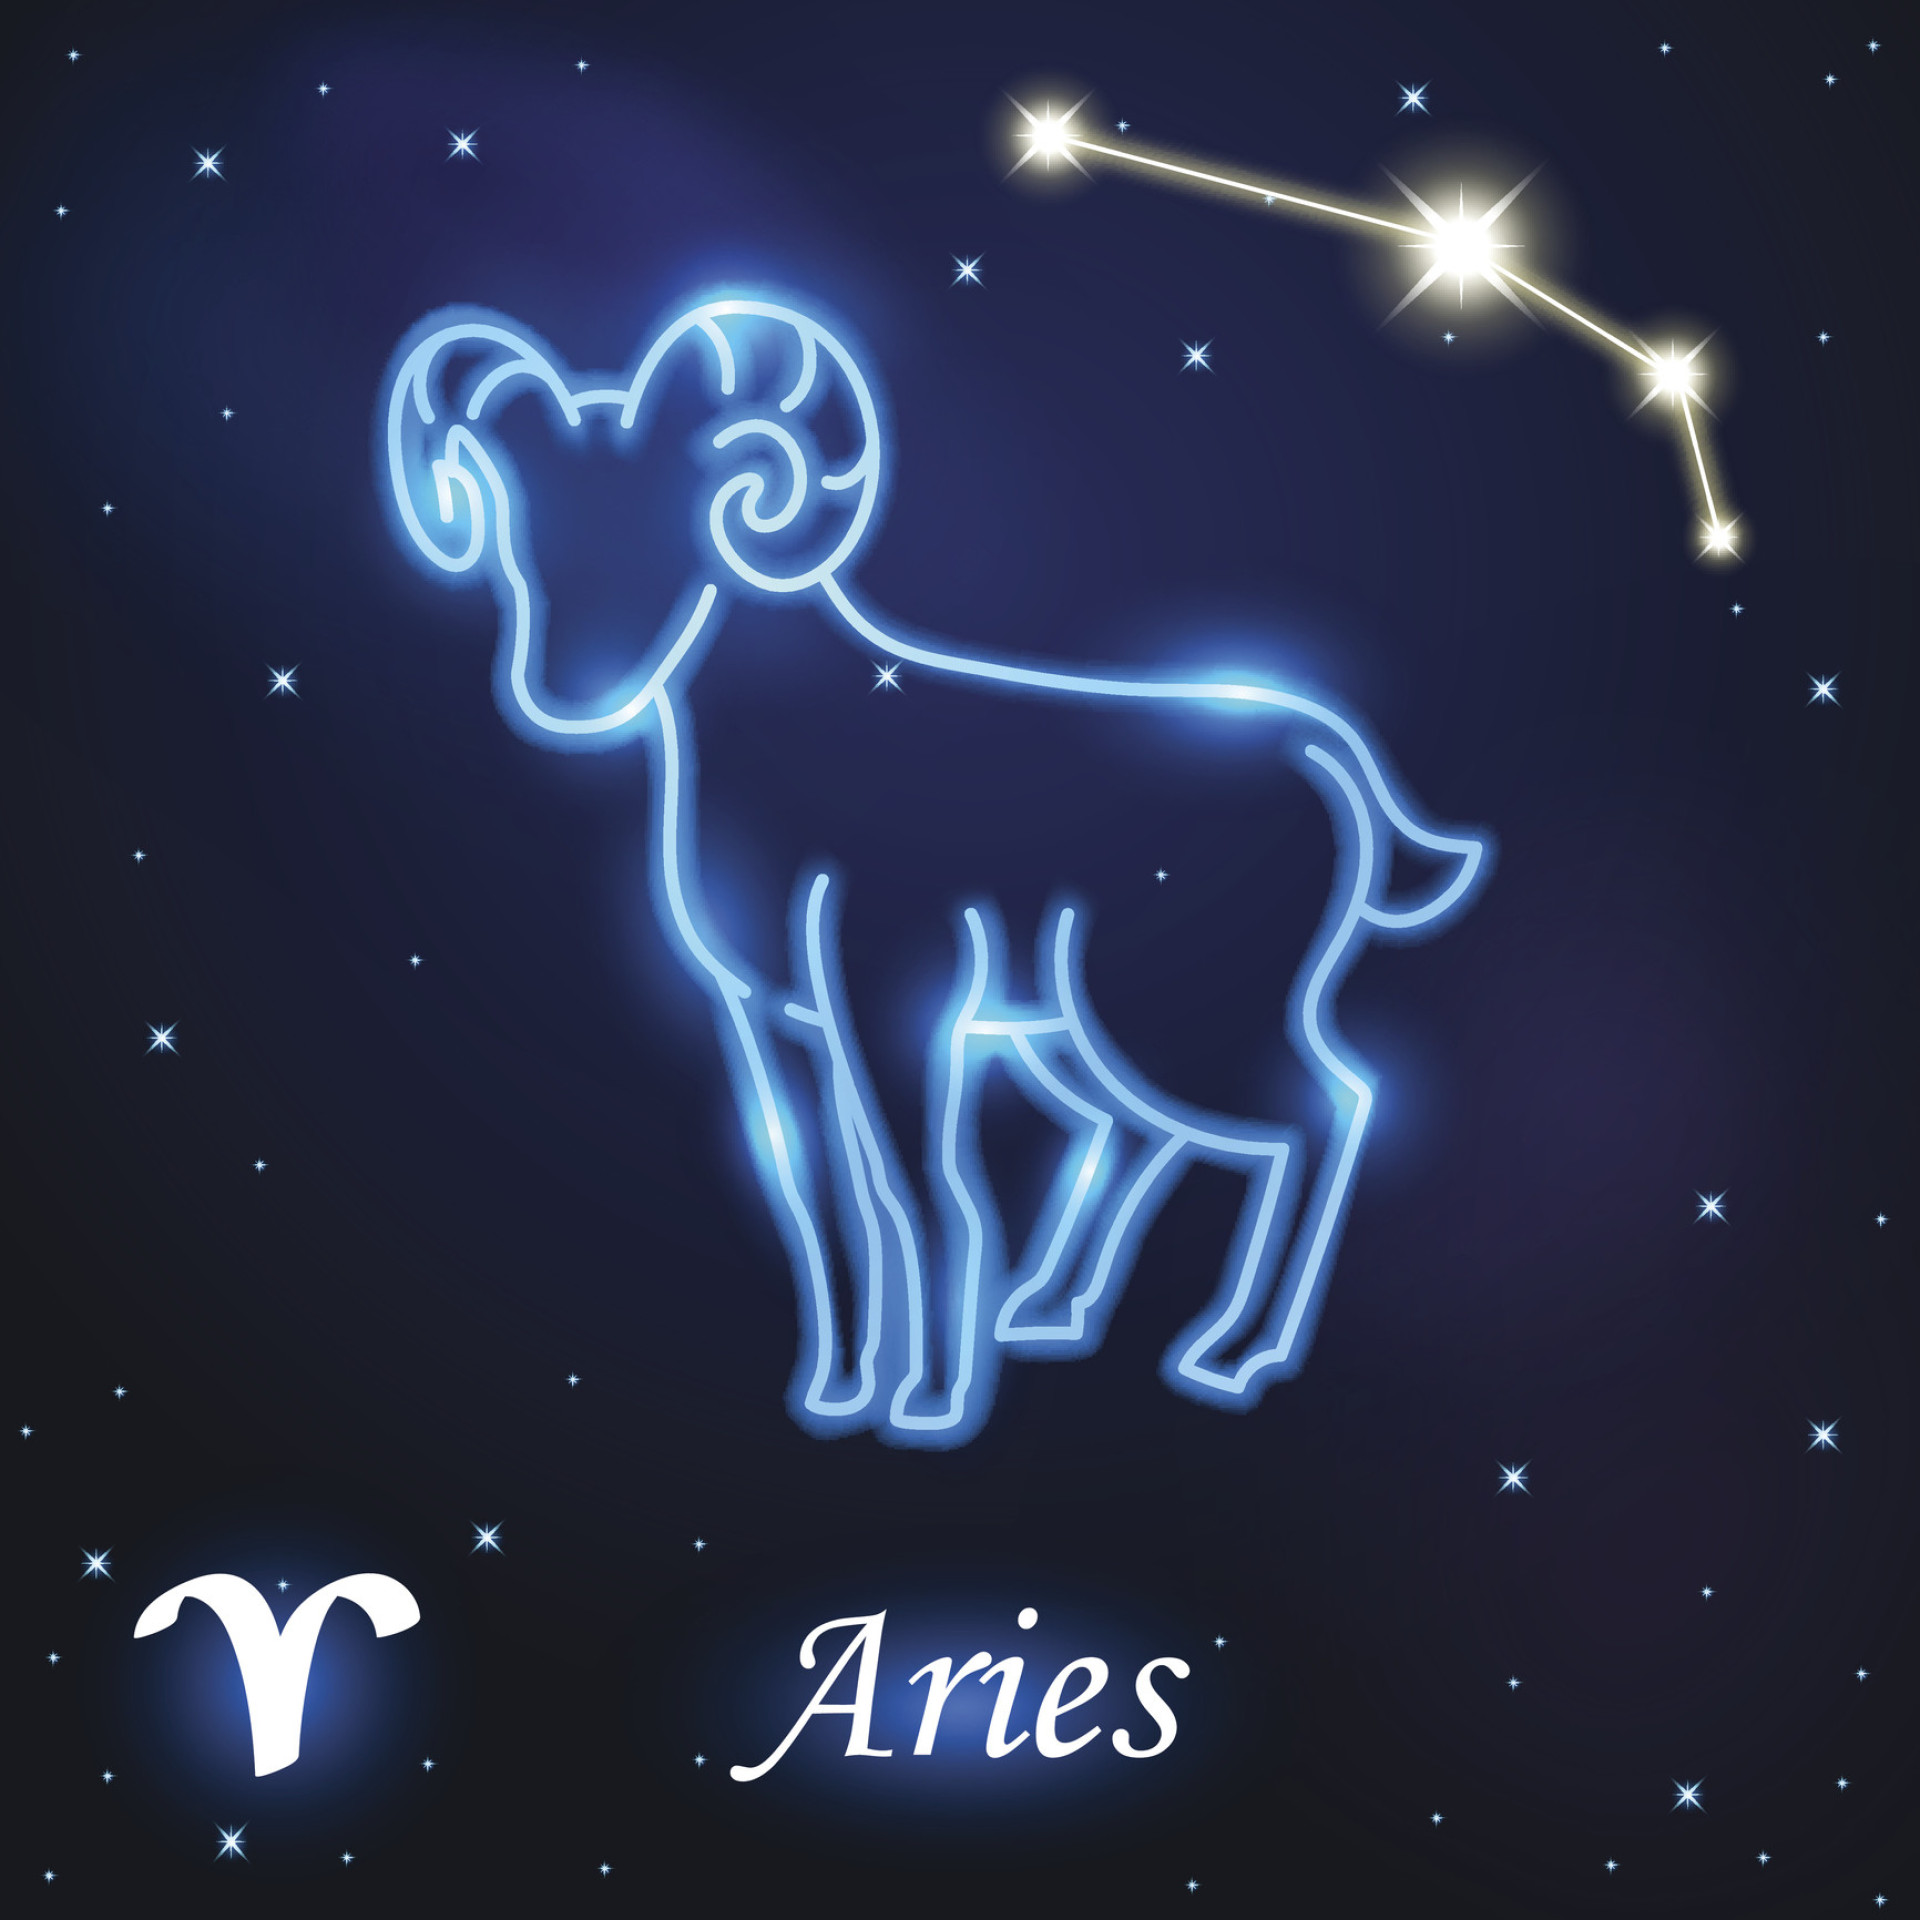 Fascinating facts about the Zodiac signs